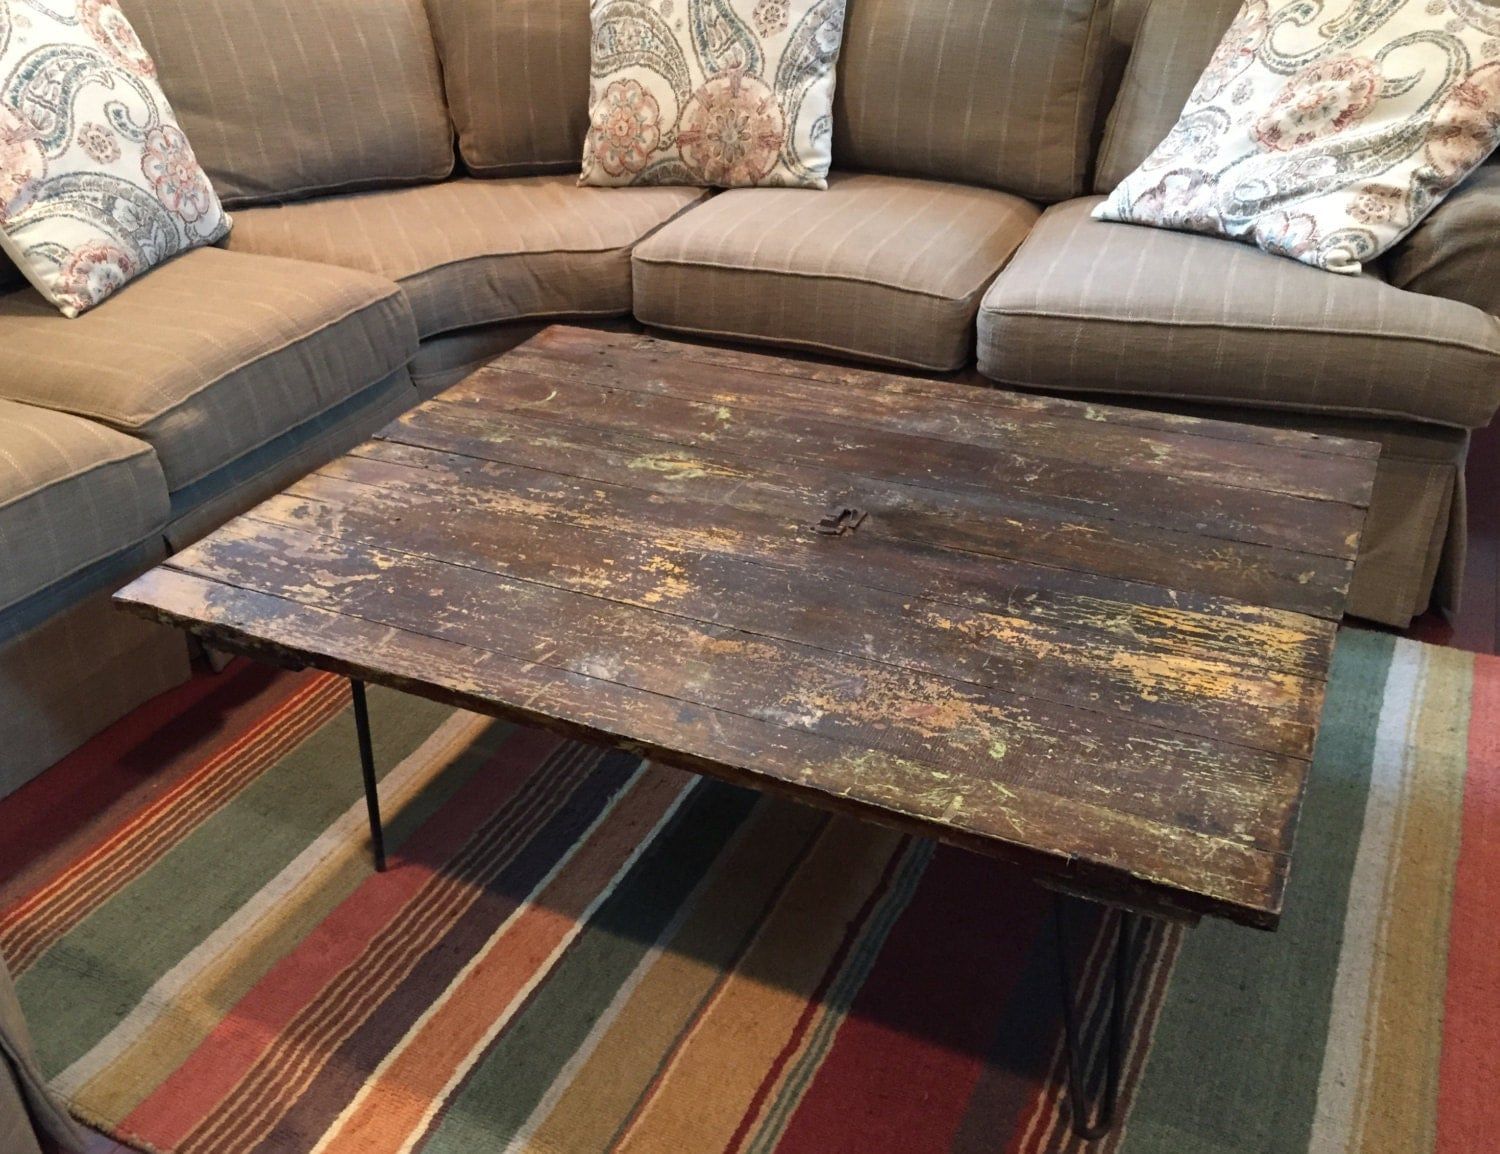 Reclaimed Shed/barn Door Coffee Table With Old Hardware And Within Coffee Tables With Sliding Barn Doors (View 10 of 20)